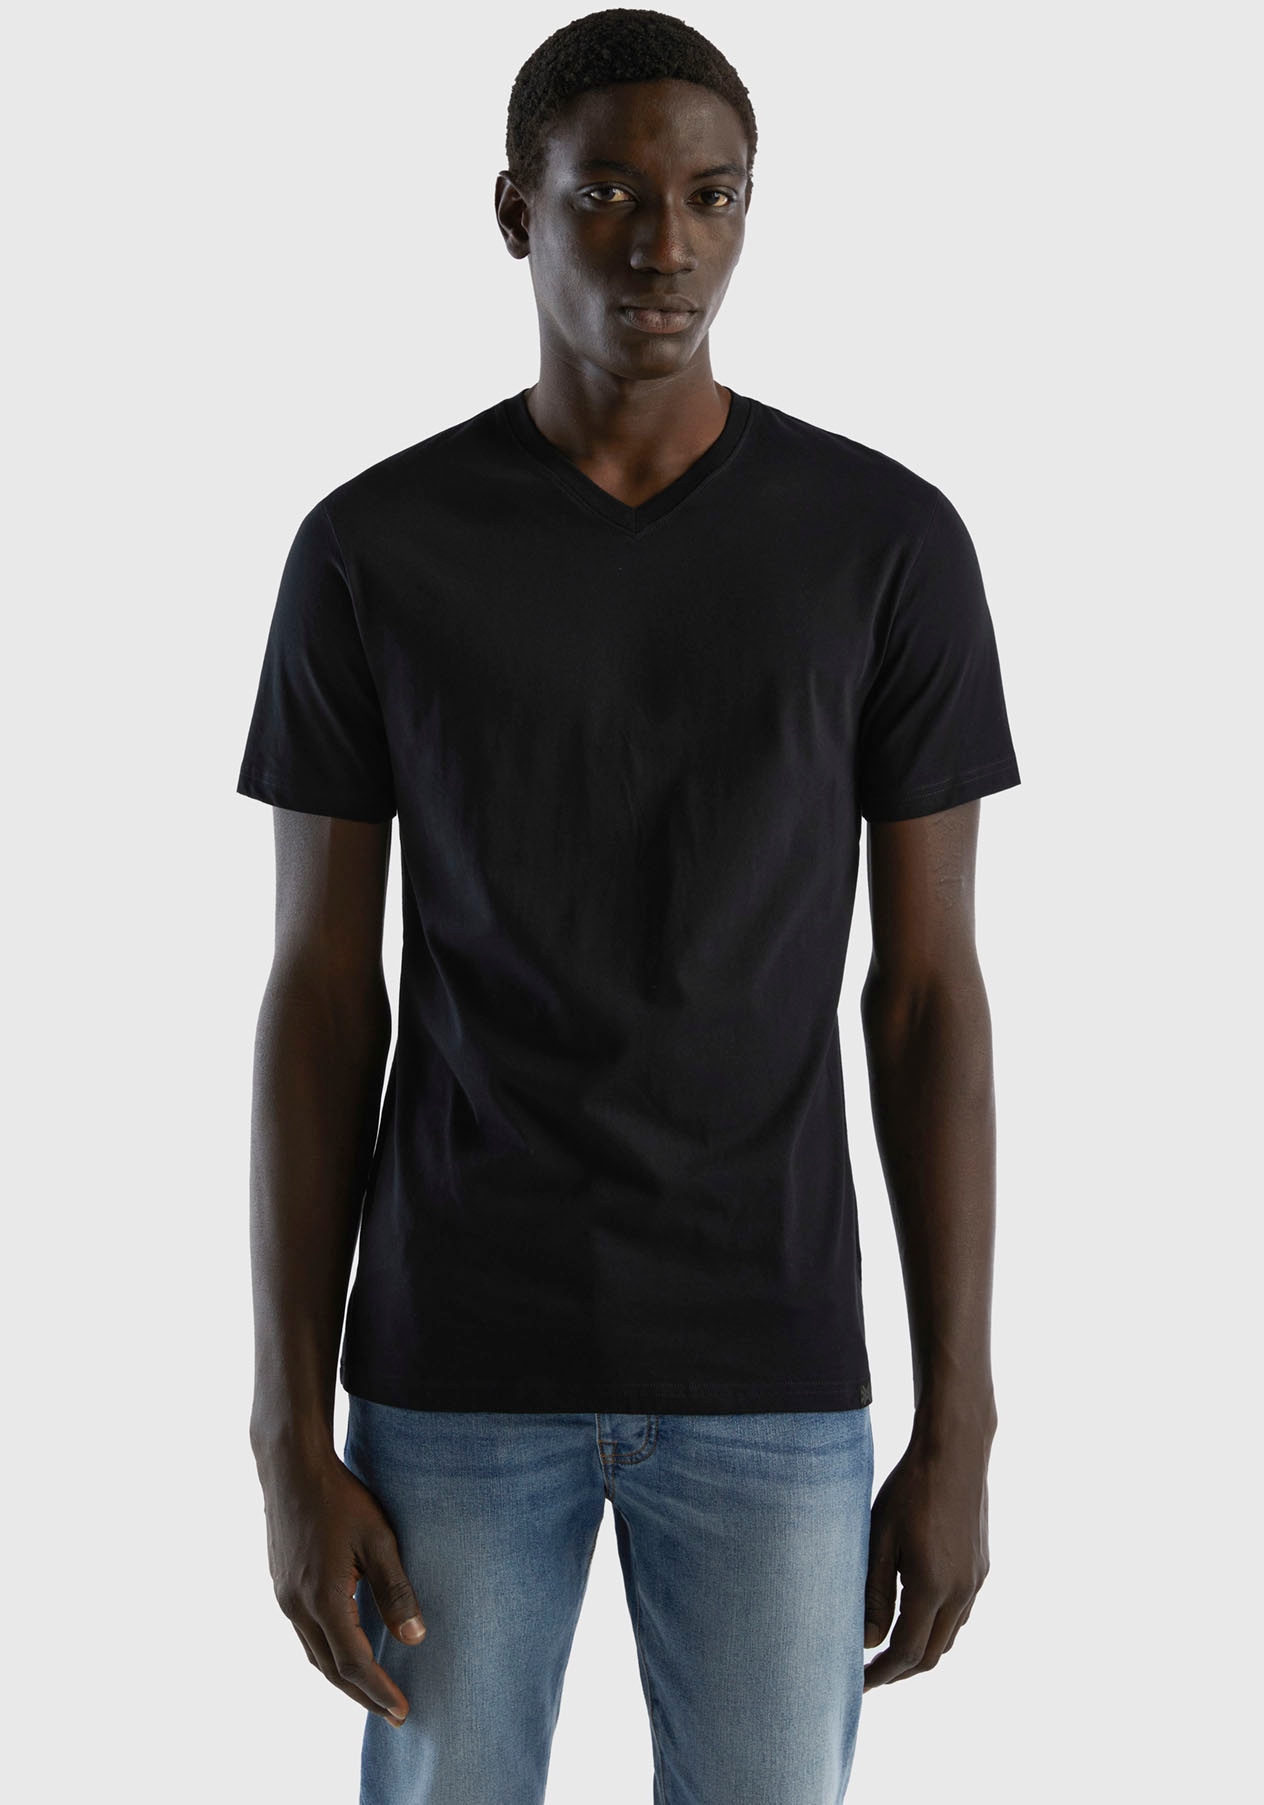 United Colors of in bei Benetton Basic-Form shoppen T-Shirt, cleaner OTTO online